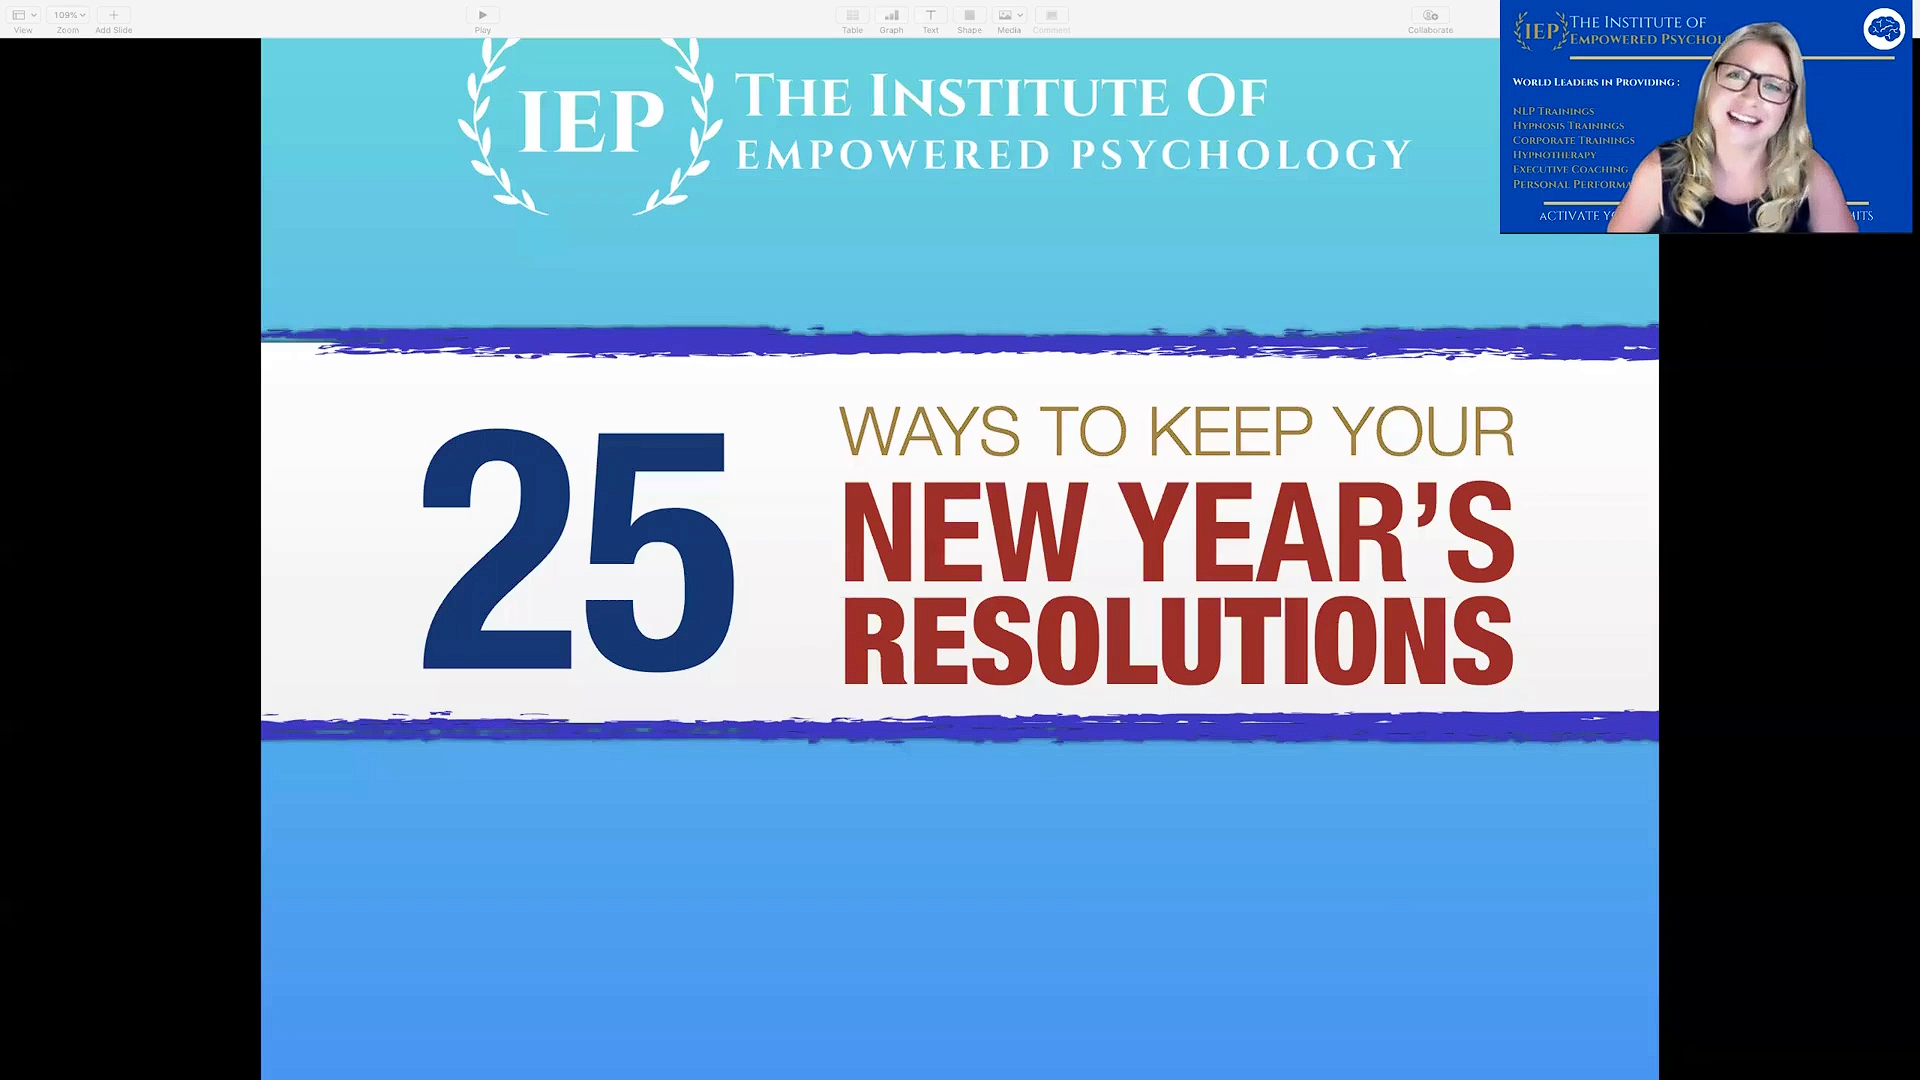 5 TIPS FOR KEEPING YOUR NEW YEAR'S RESOLUTIONS